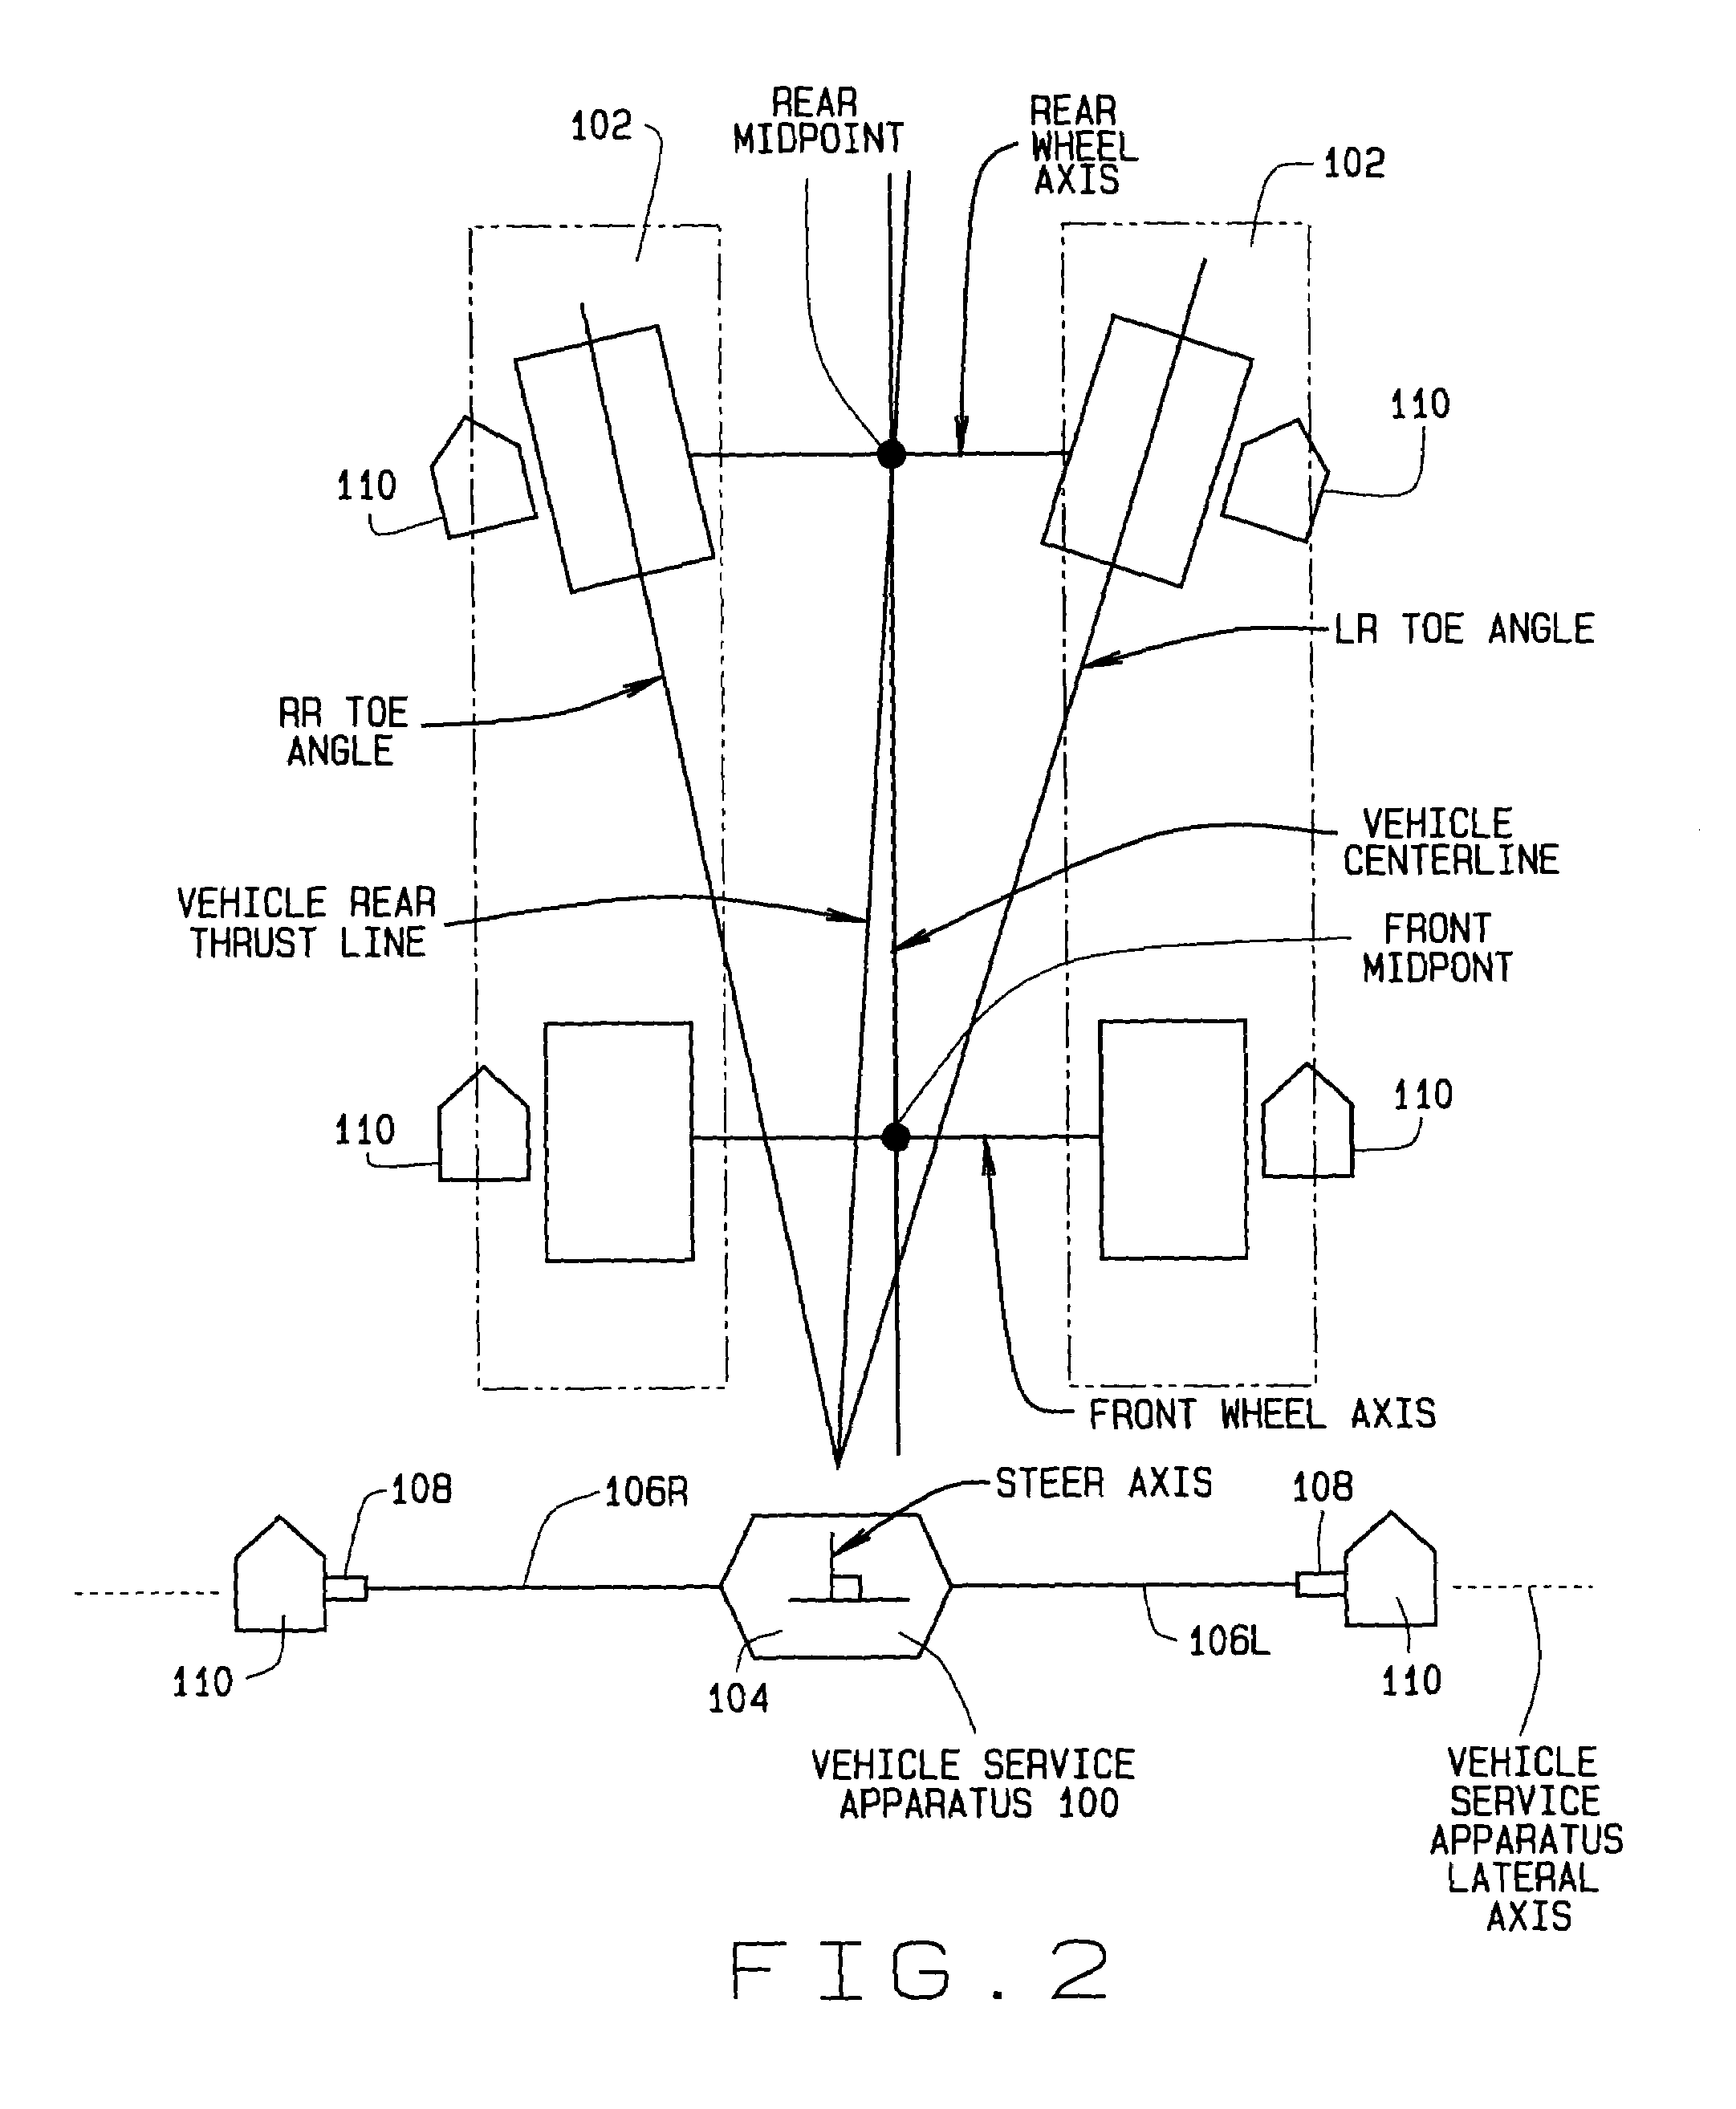 Method and apparatus for guiding placement of vehicle service fixtures